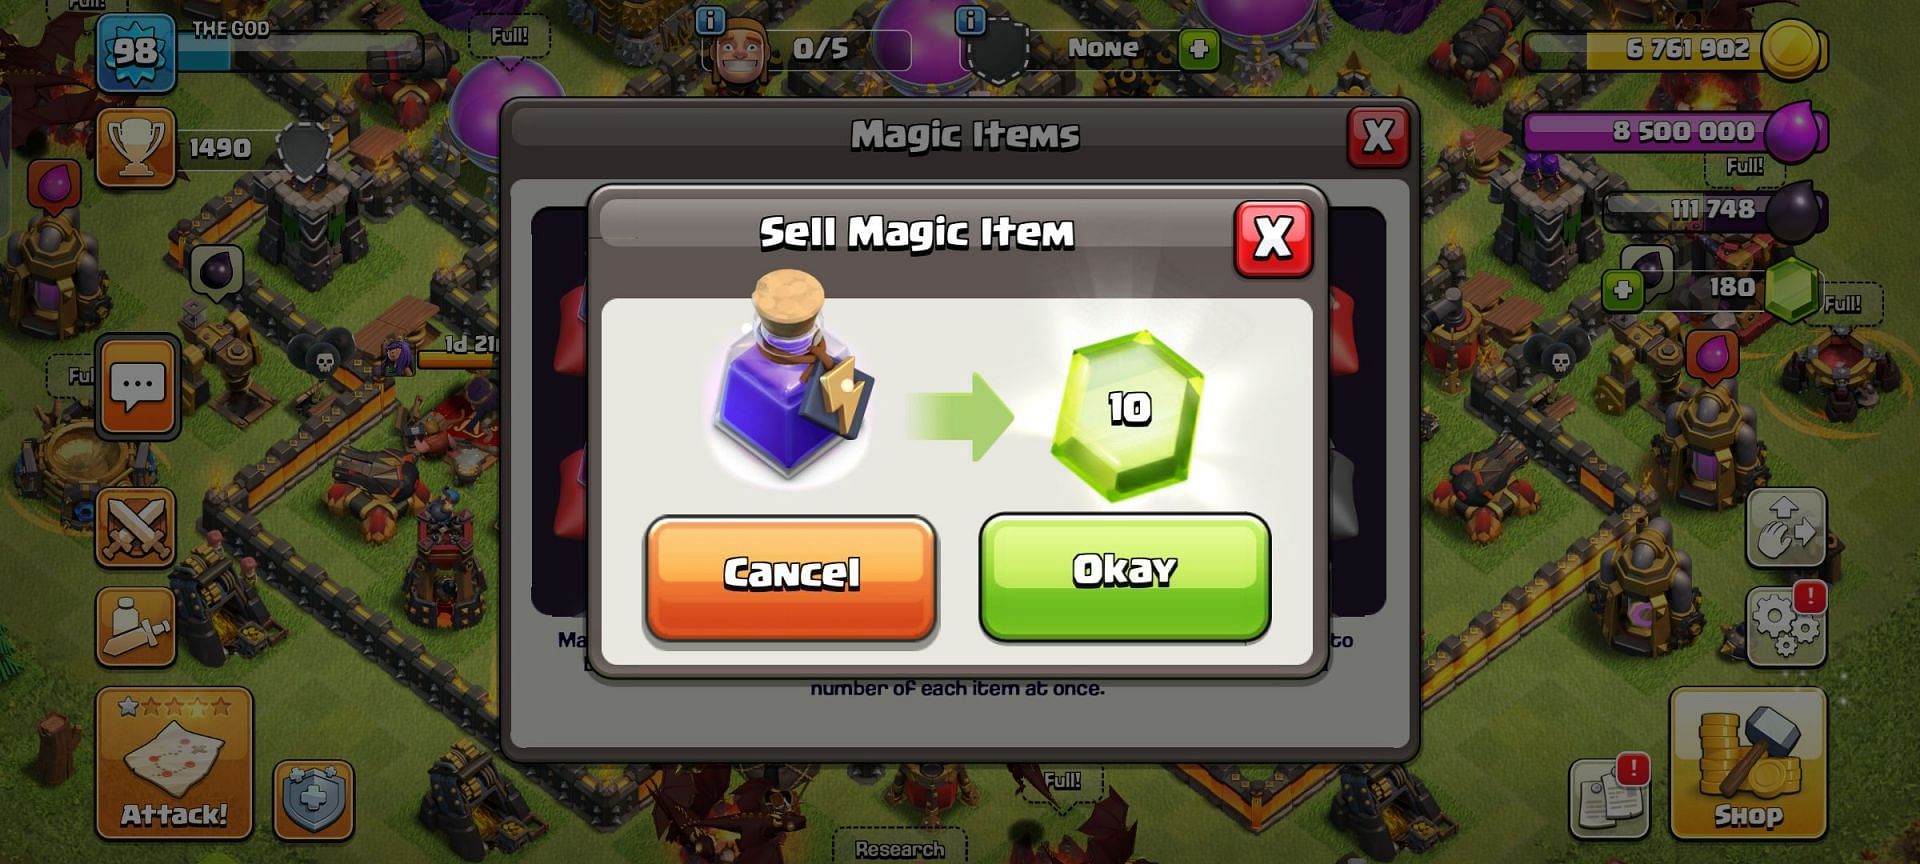 Gamers may sell Magic Items to get gems (Image via Supercell)